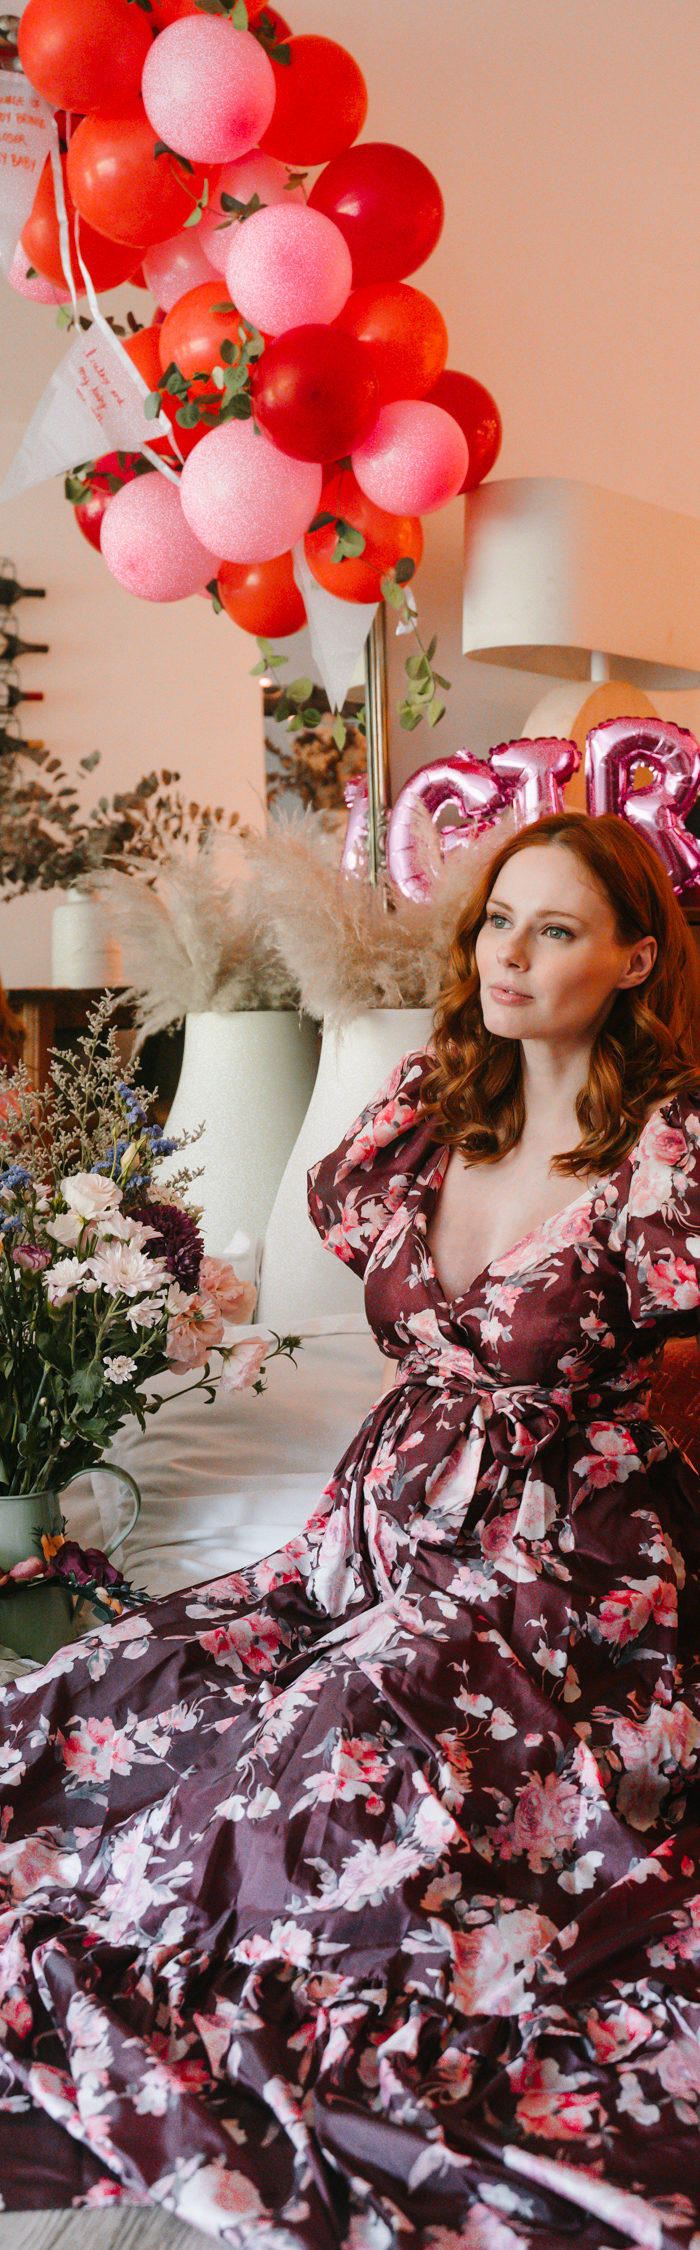 Miss USA 2011 Alyssa Campanella of The A List blog shares her dreamy virtual baby shower